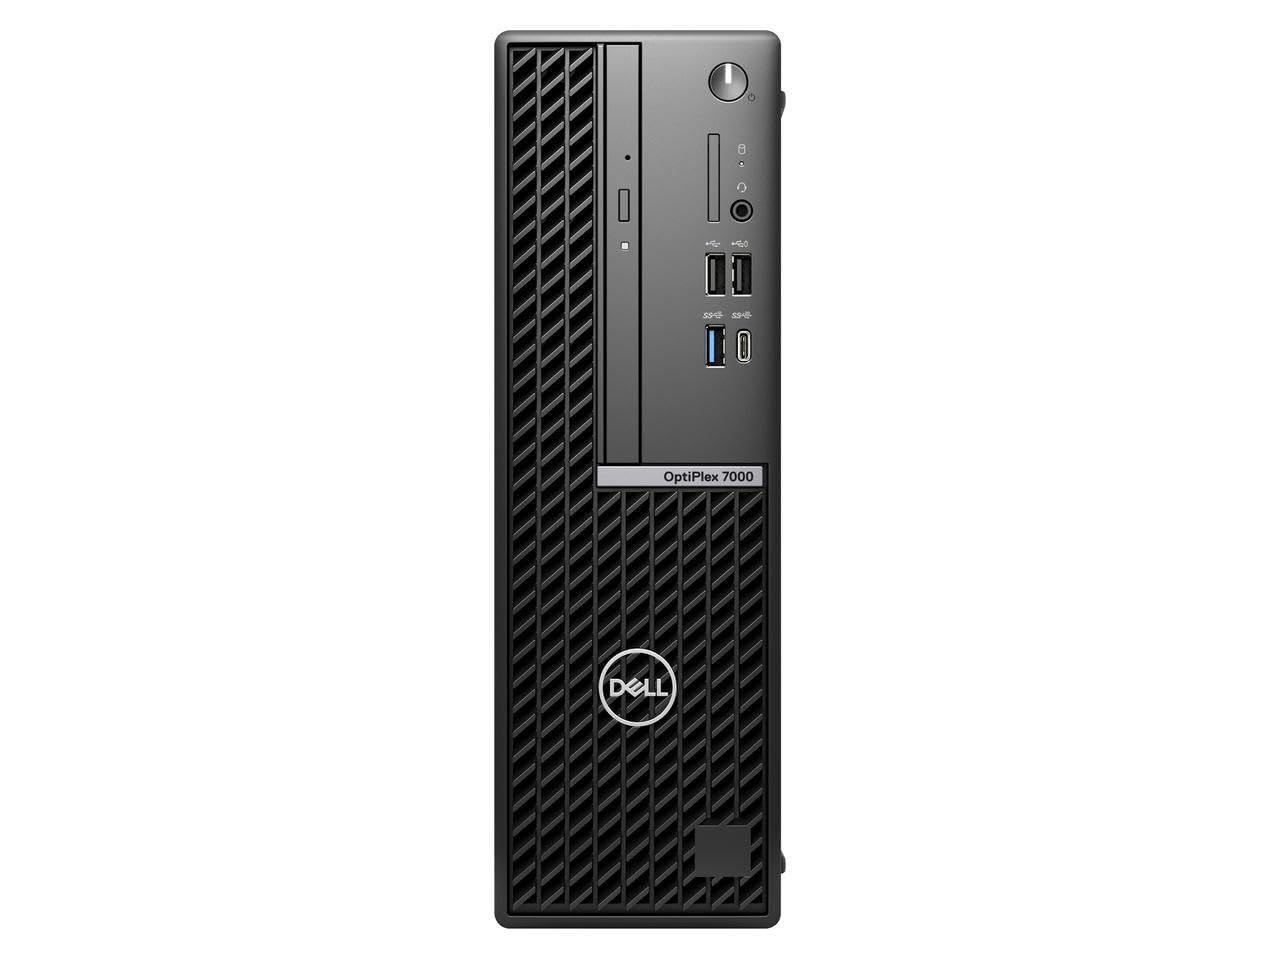 Desktop Dell OptiPlex 7010 Plus SFF, 300W Platinum Power Supply, WW, EPEAT 2018 Registered (Silver), ENERGY STAR Qualified, SW Driver, Intel Rapid Storage Technology, OptiPlex Small Form, Trusted Platform Module (Discrete TPM Enabled), 13th Gen Intel Core i7-13700 (8+8 Cores/30MB/24T/2.1GHz to_2